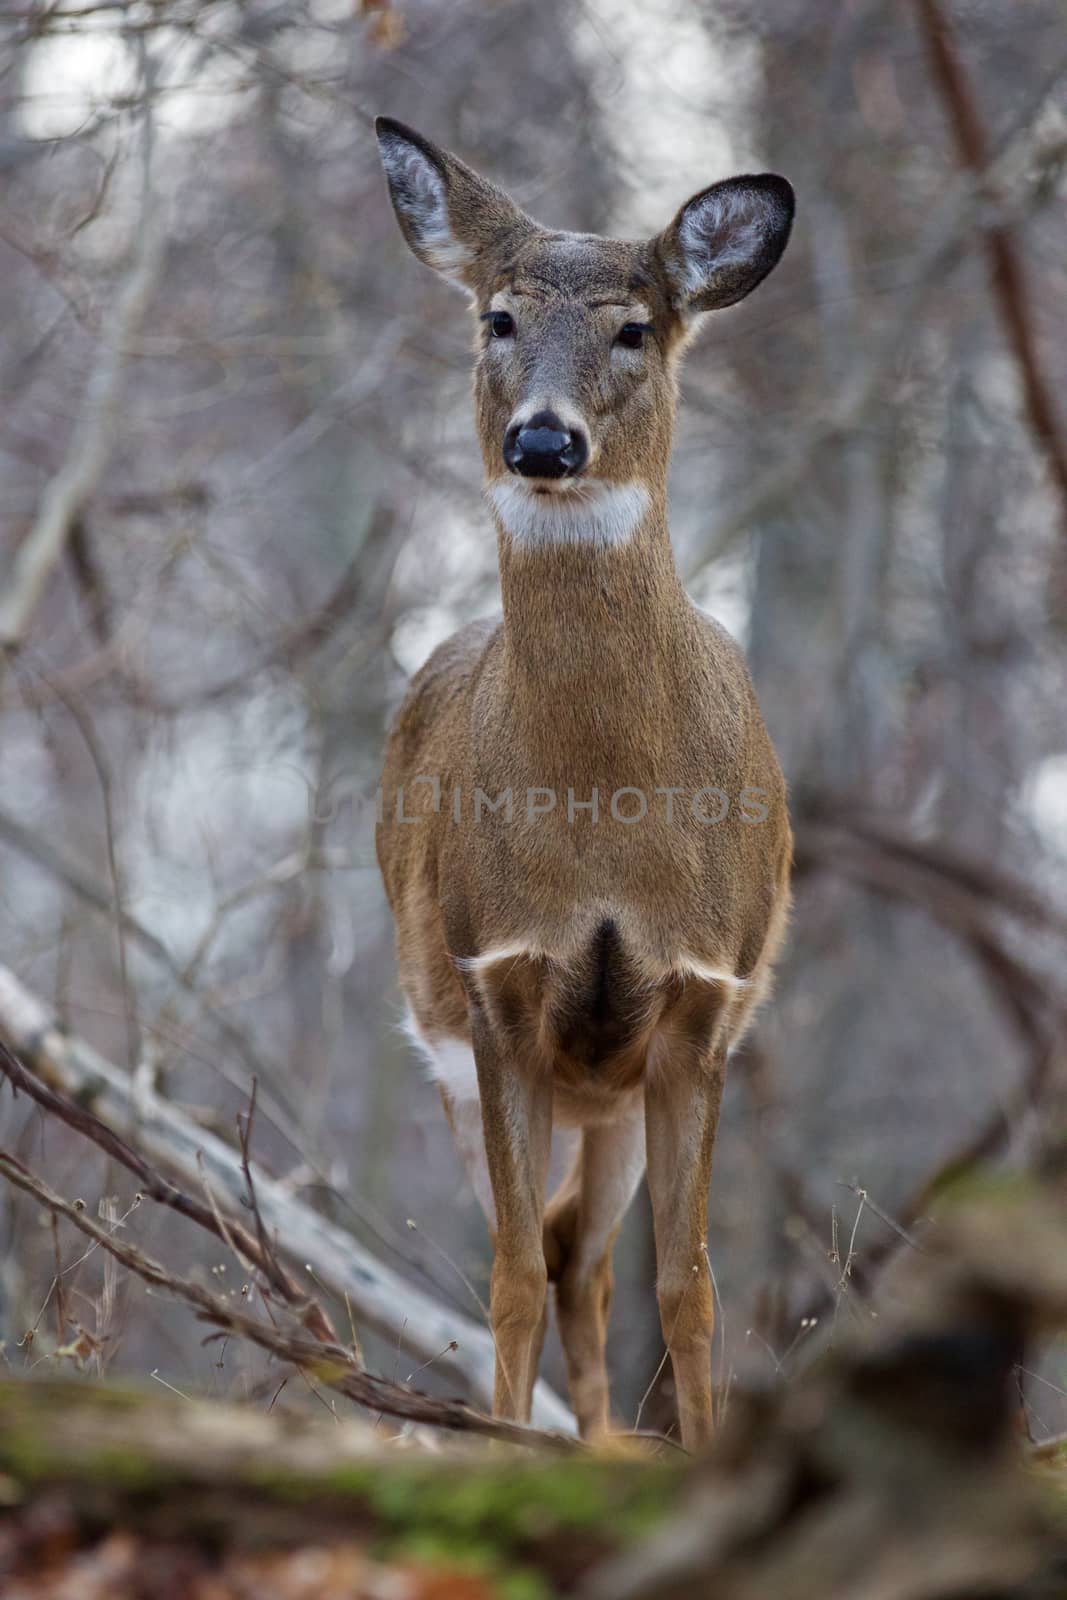 Beautiful image with the young deer in the forest